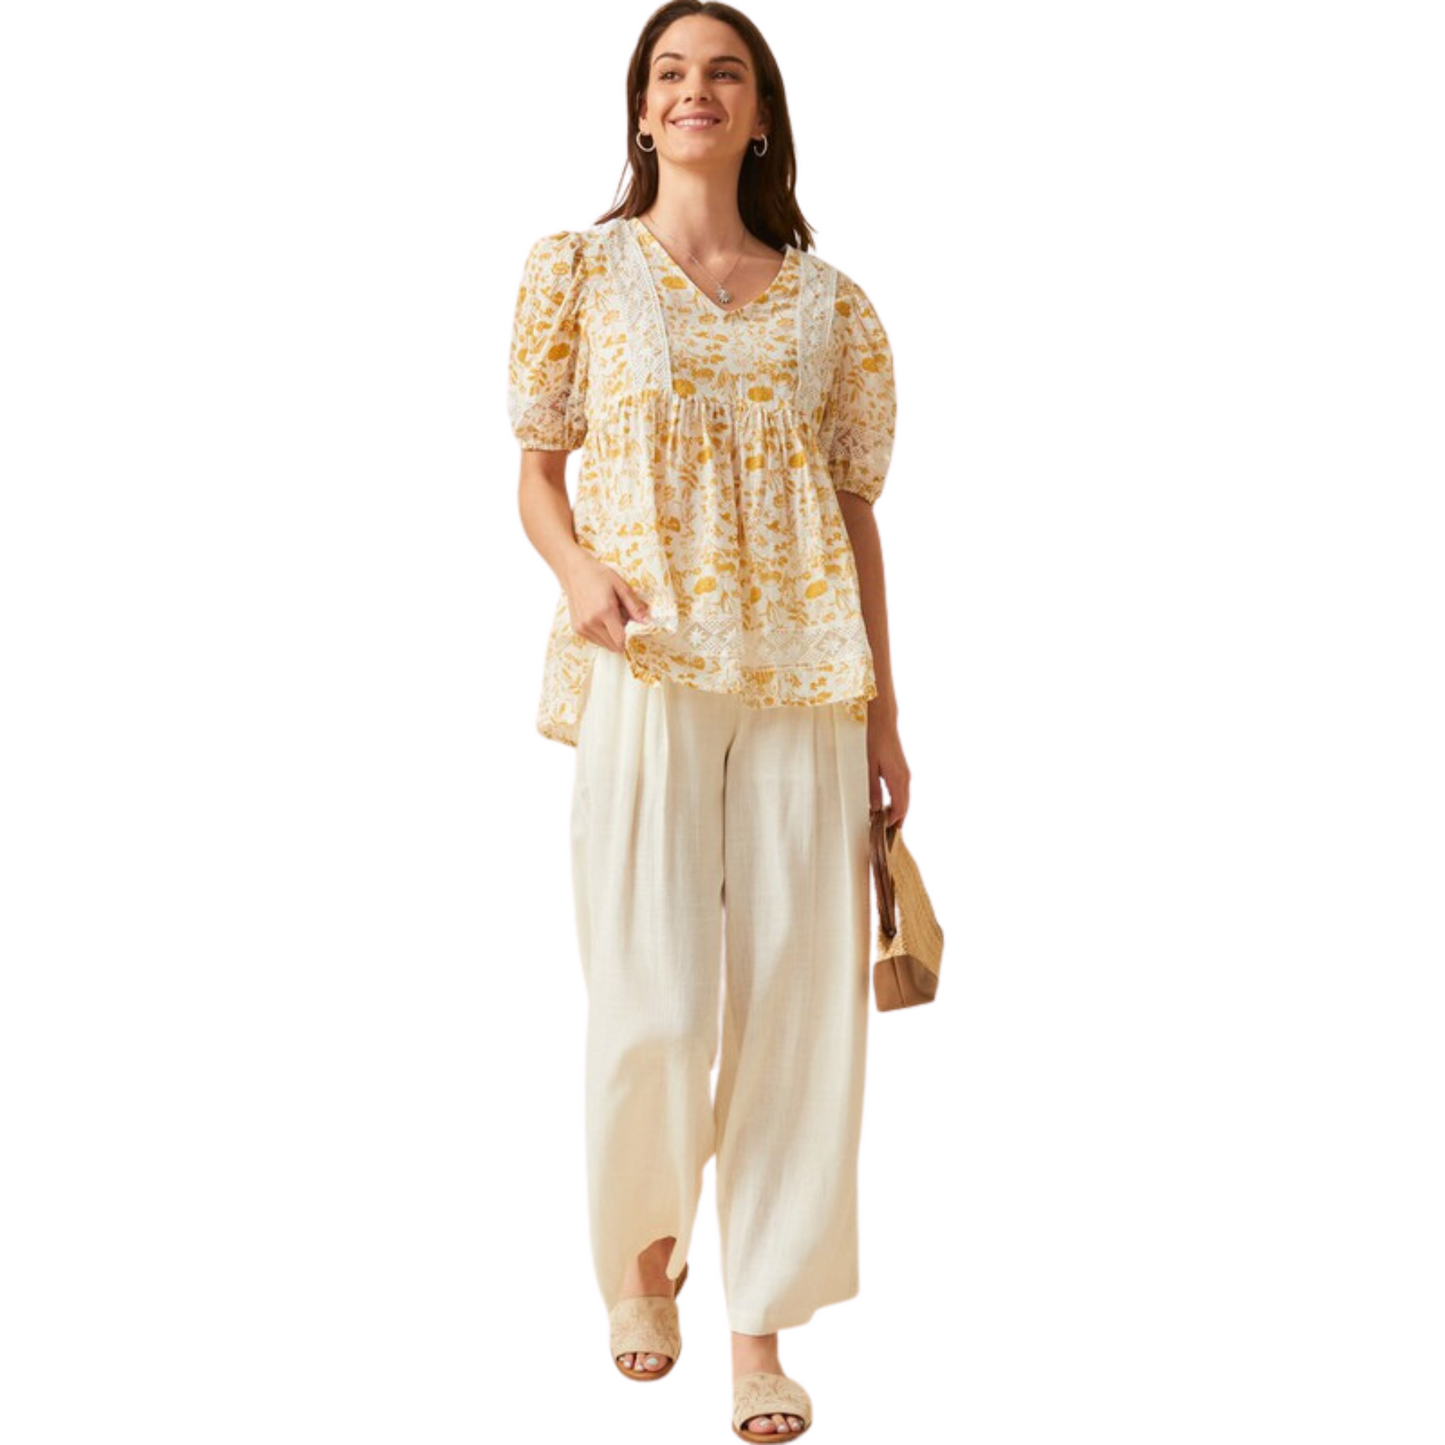 This Floral Lace Puff Sleeve Tunic Top is a stylish combination of modern and classic - featuring a yellow and white floral design, this babydoll top with puff sleeves is perfect for a daytime or evening look. The timeless lace detail is sure to make it a wardrobe staple.